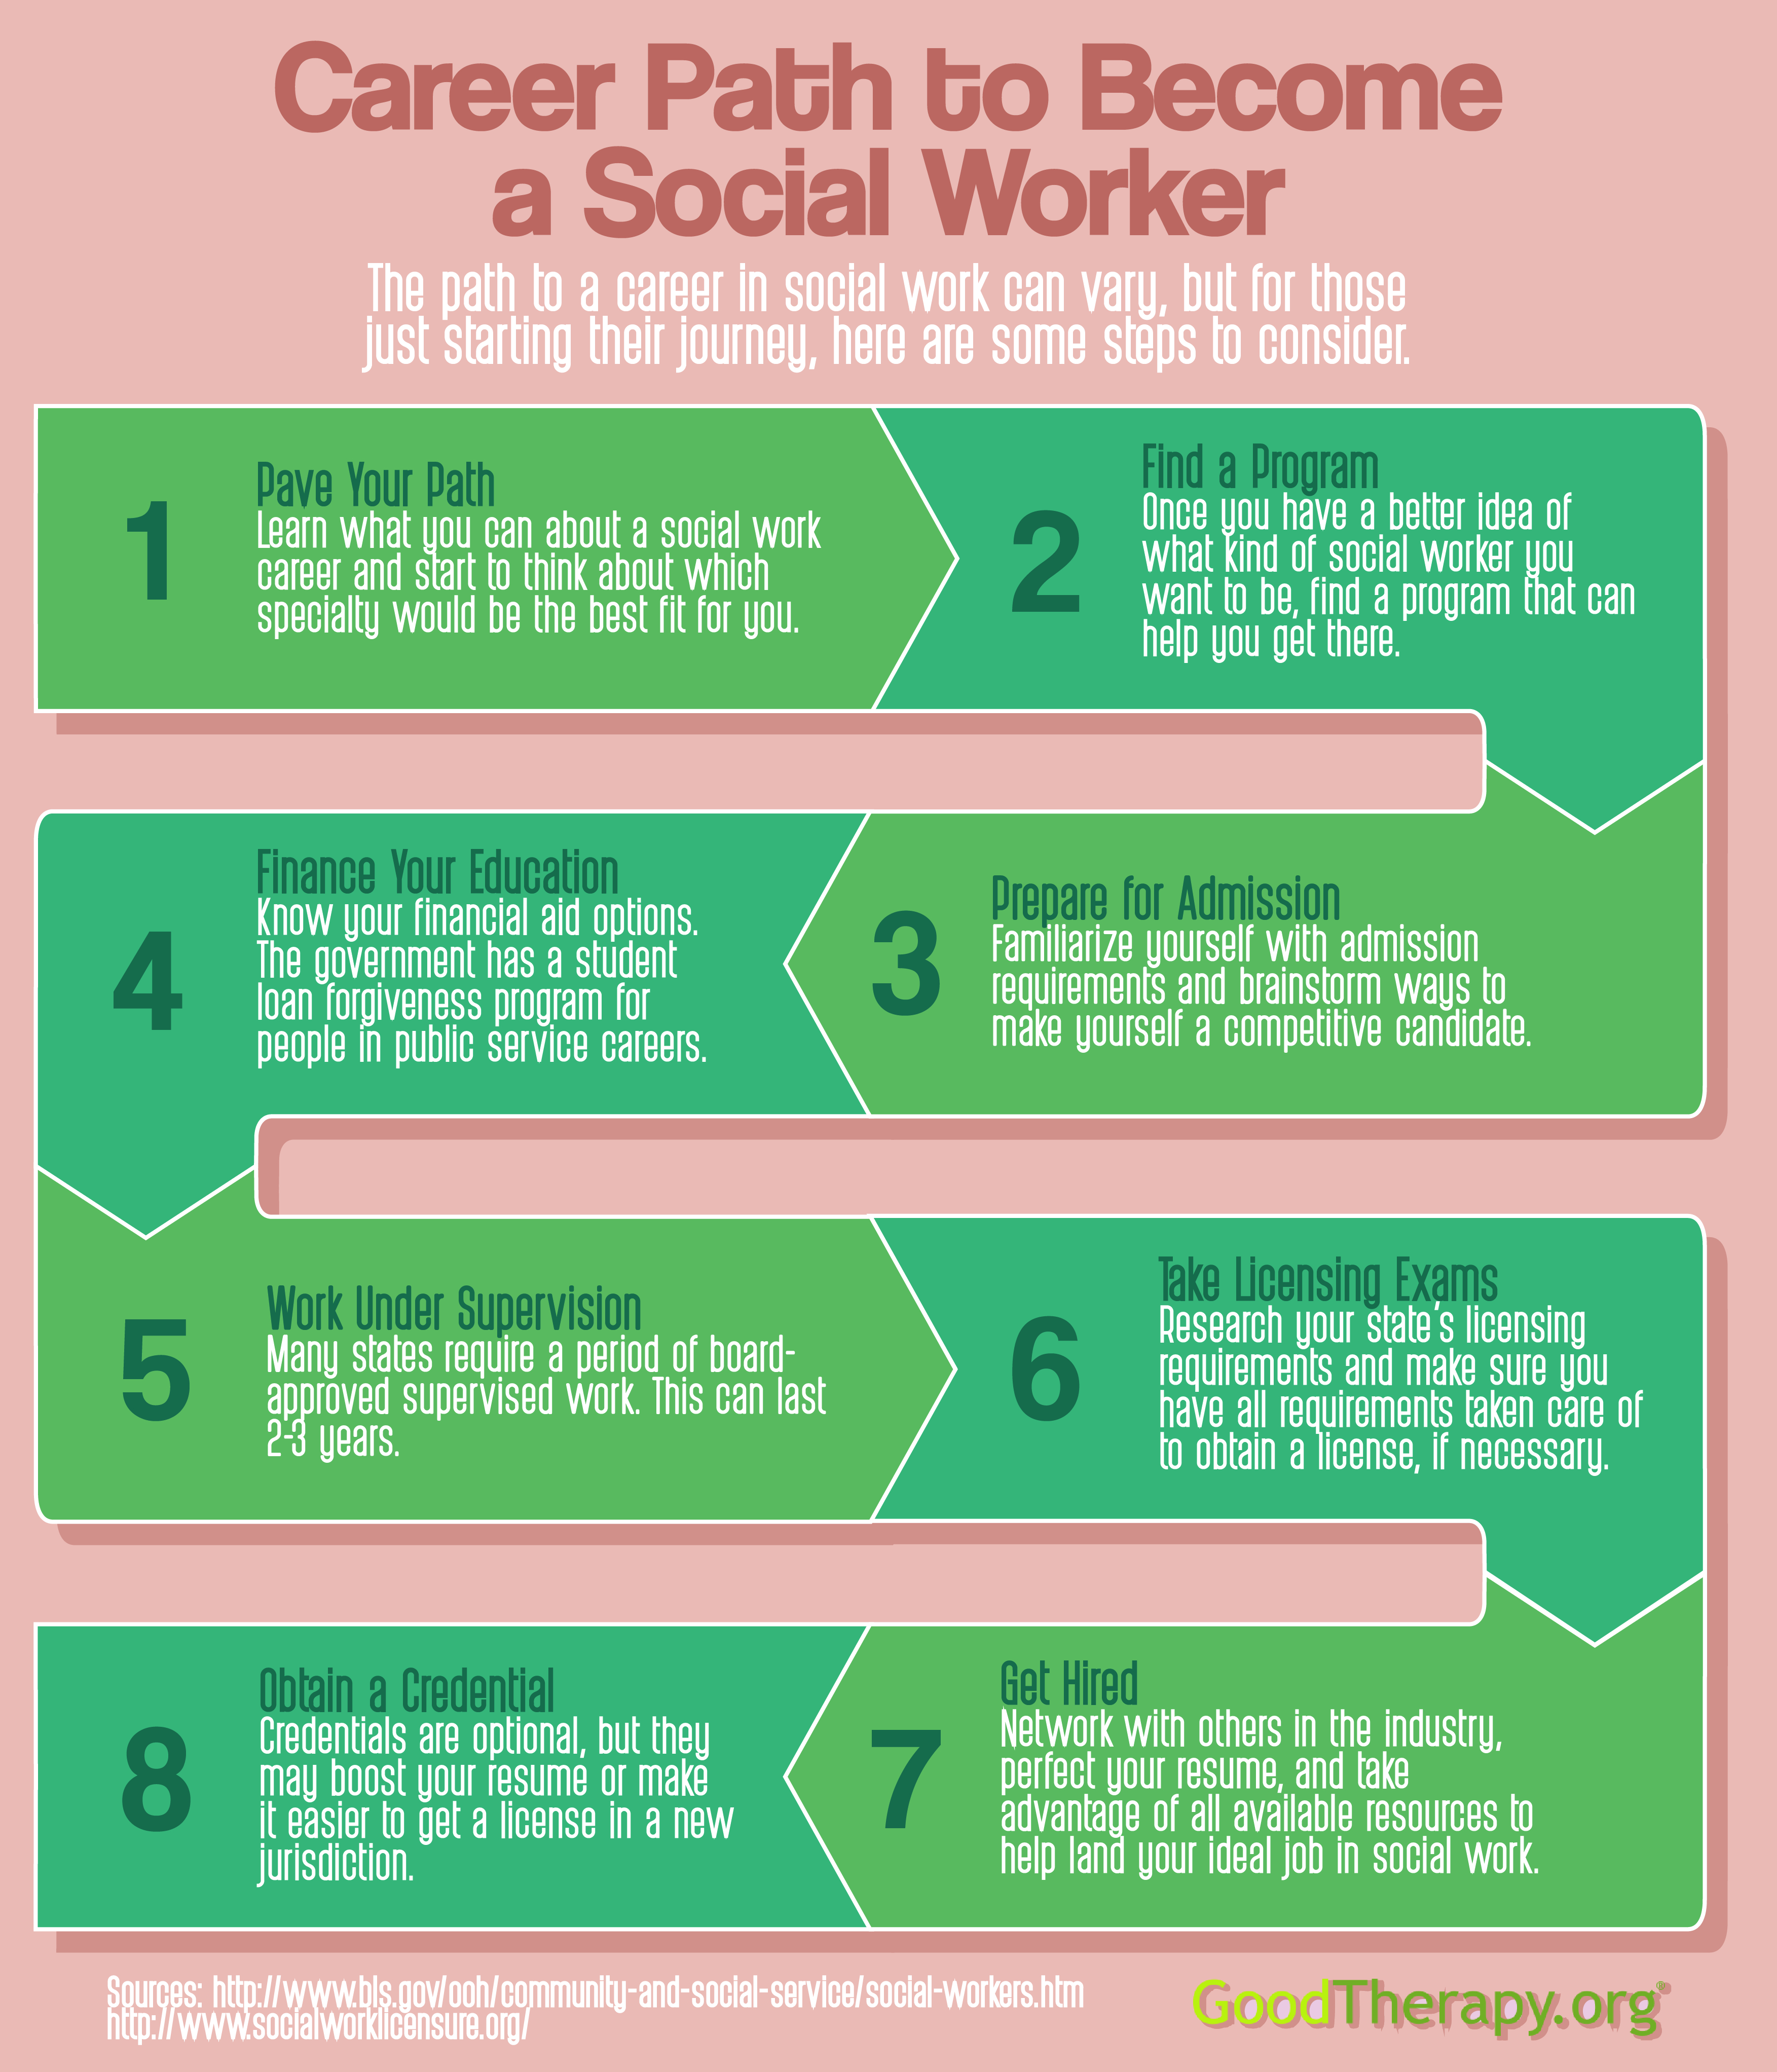 For anyone wondering what steps are involved in becoming a social worker, GoodTherapy.org has designed a clear path to follow.